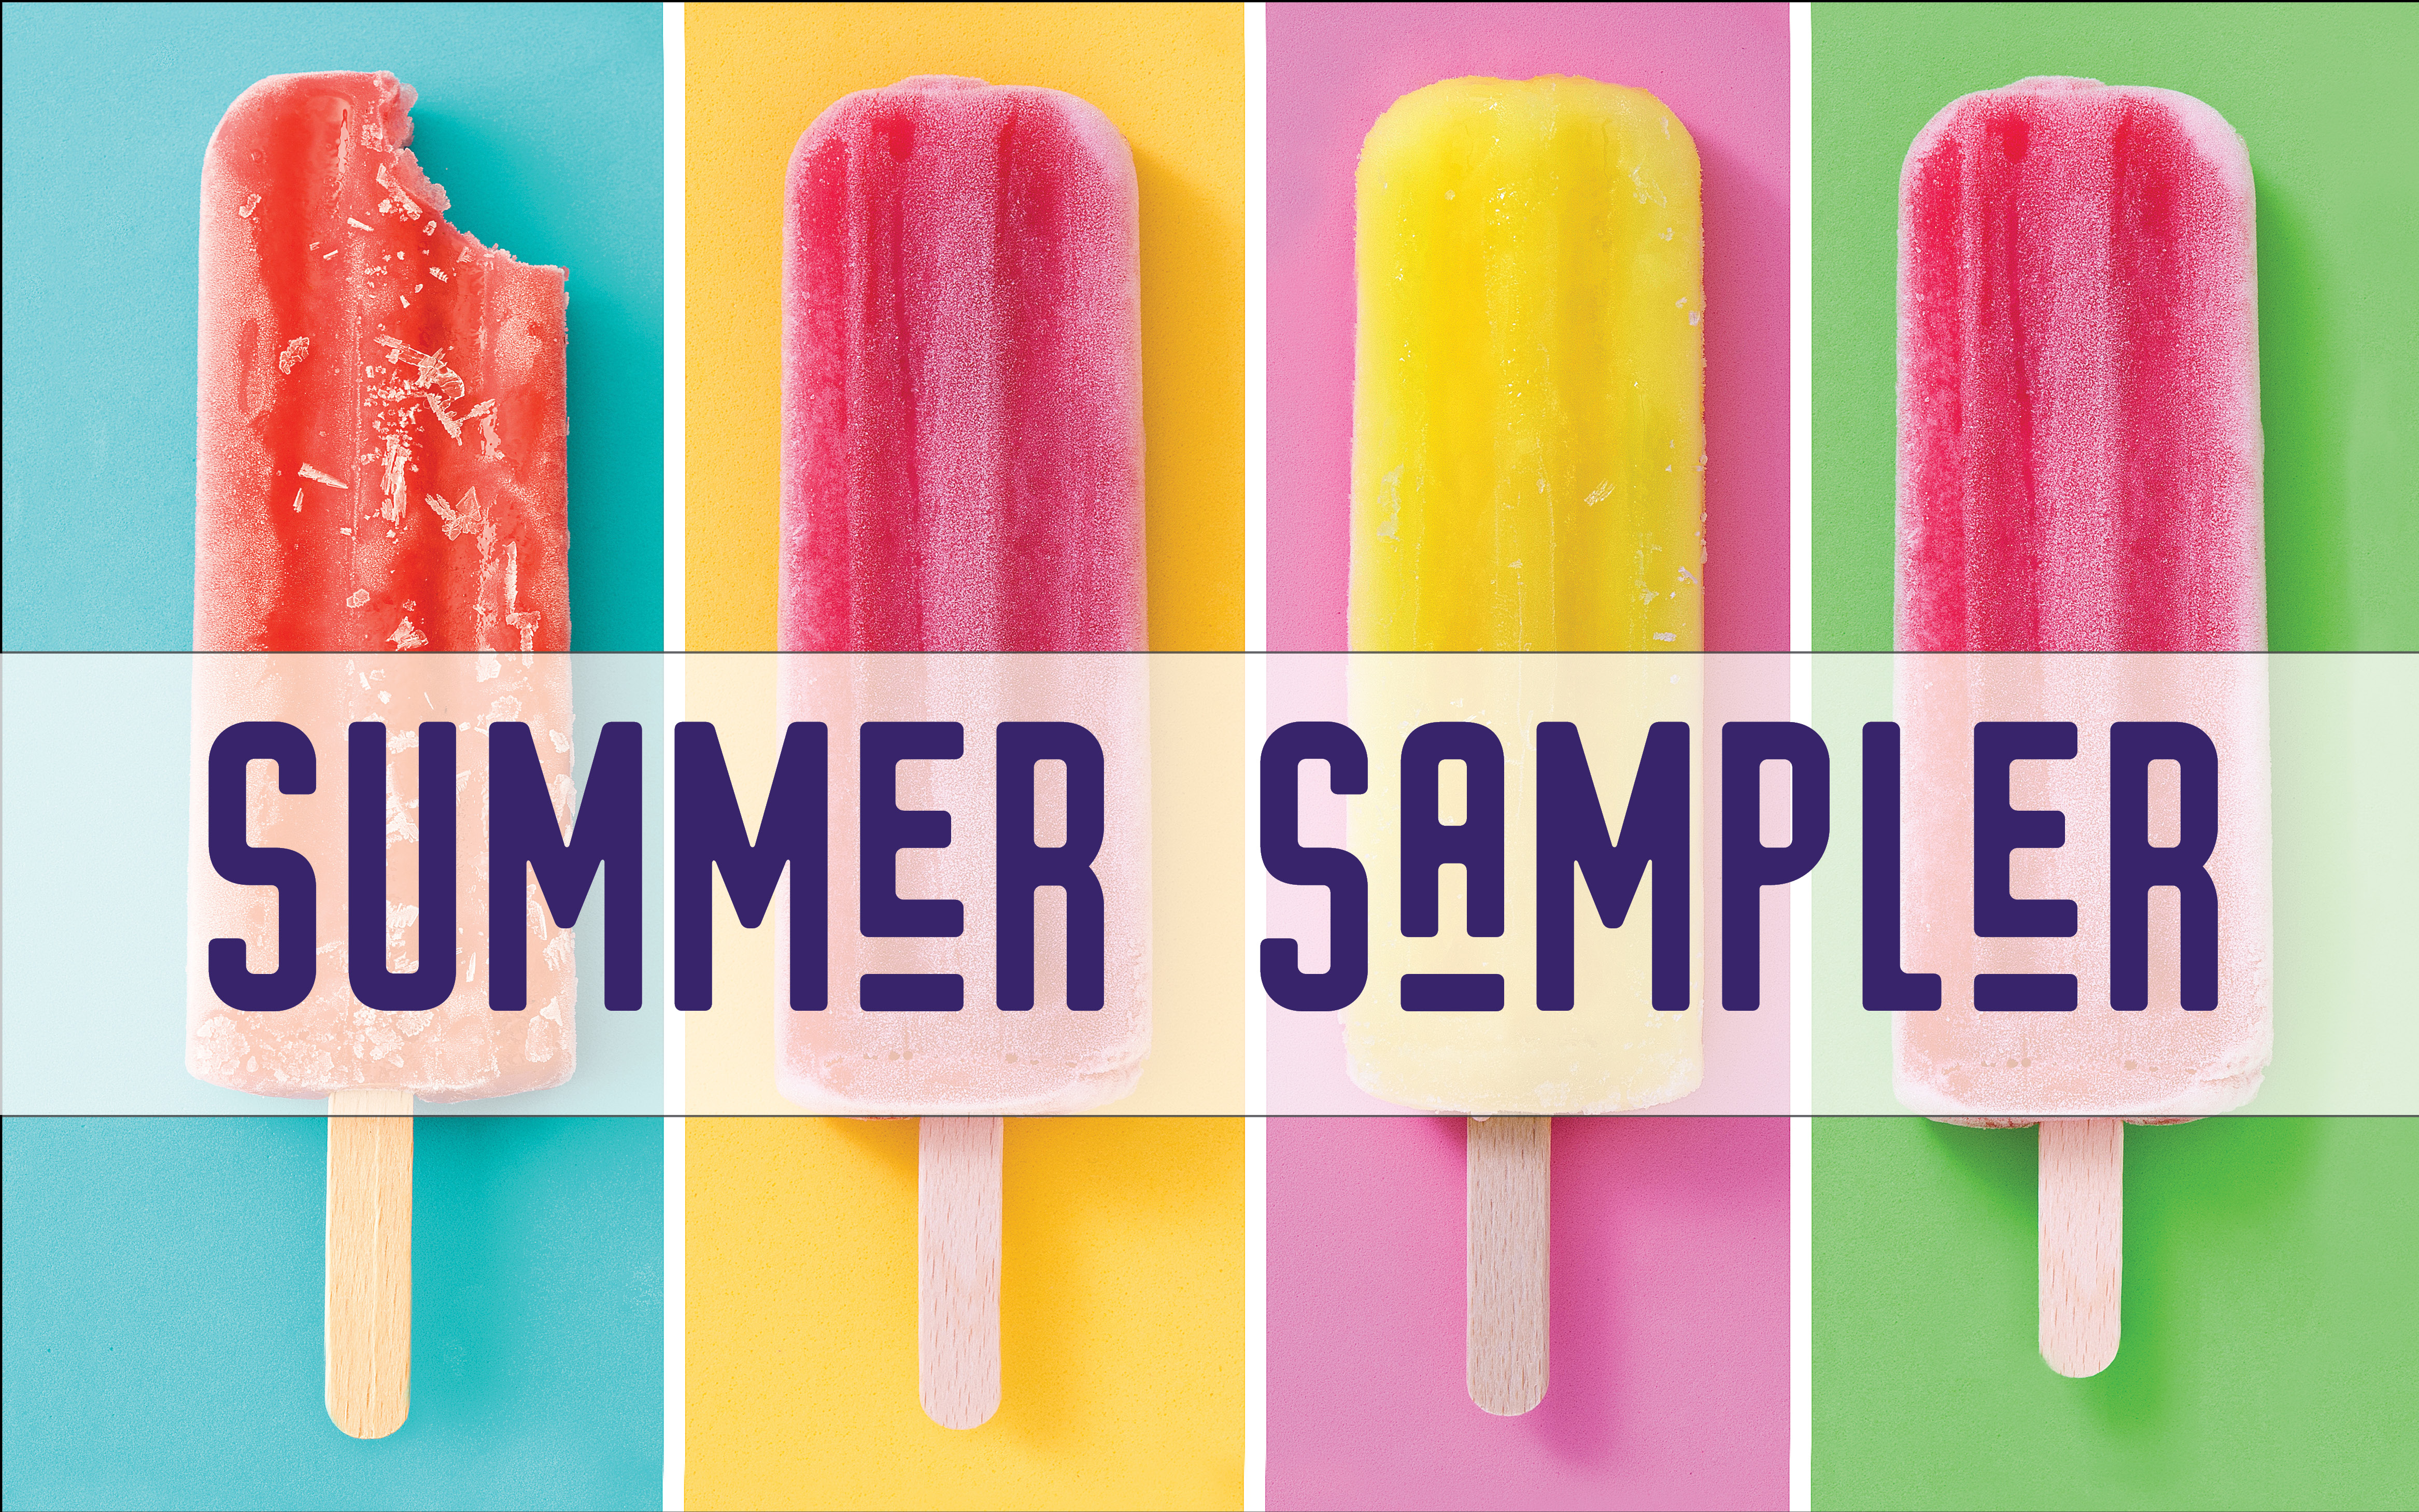 Popsicles with the words Summer Sampler